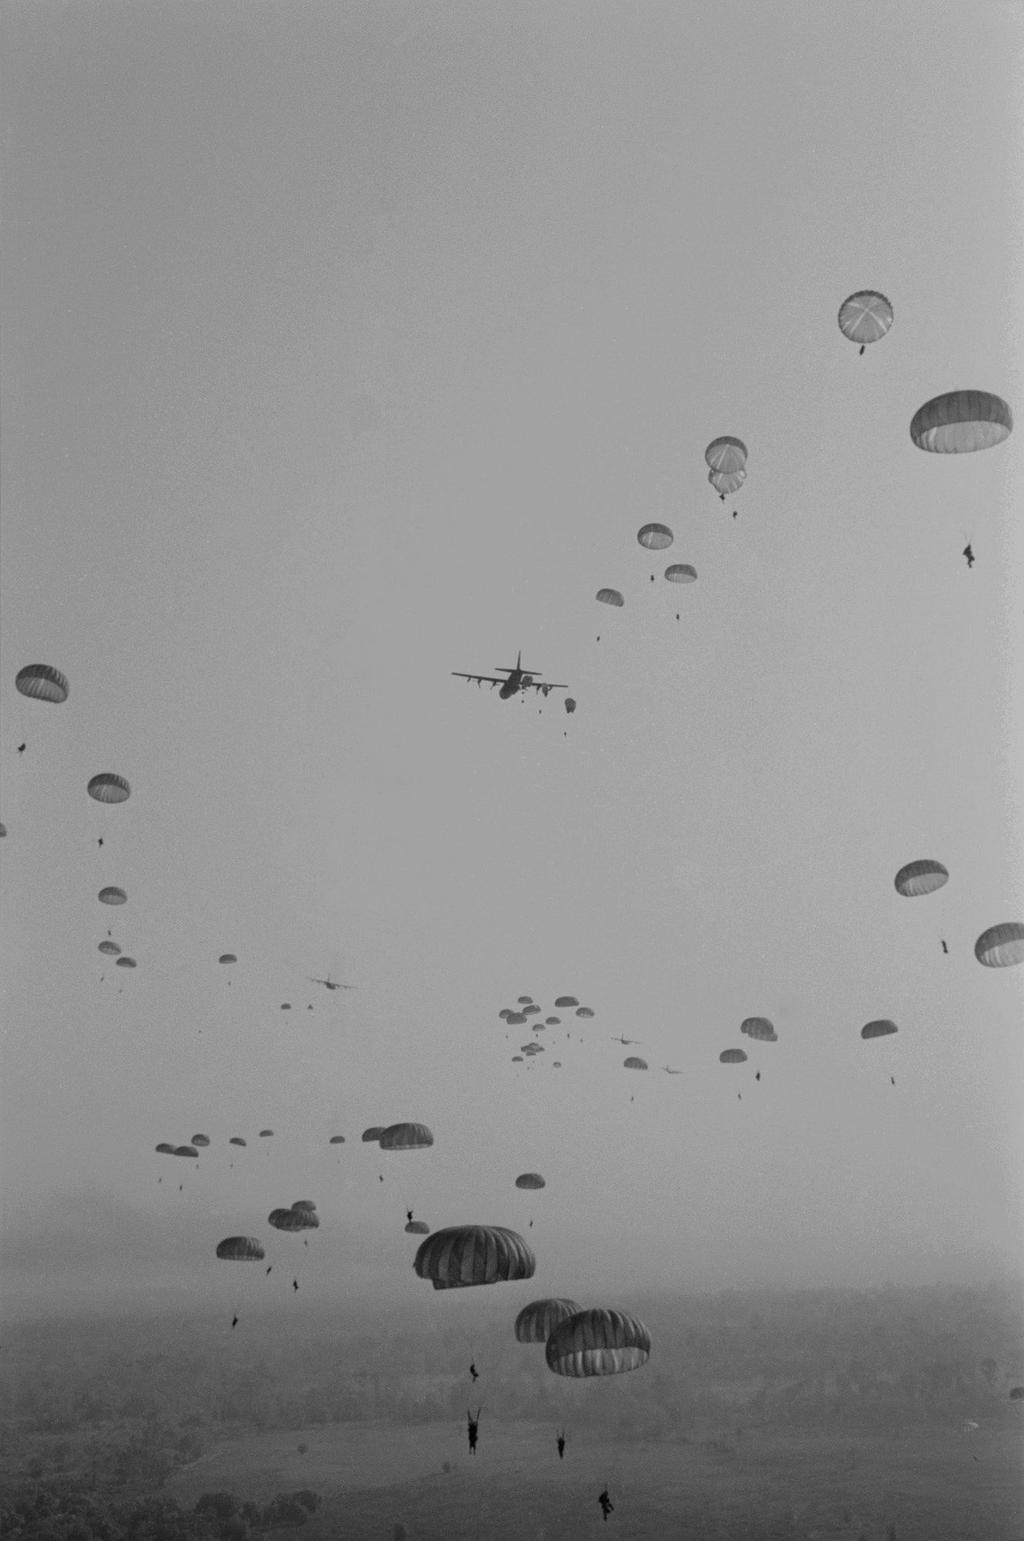 Catherine Leroy with the 173rd Airborne Brigade in a combat jump,